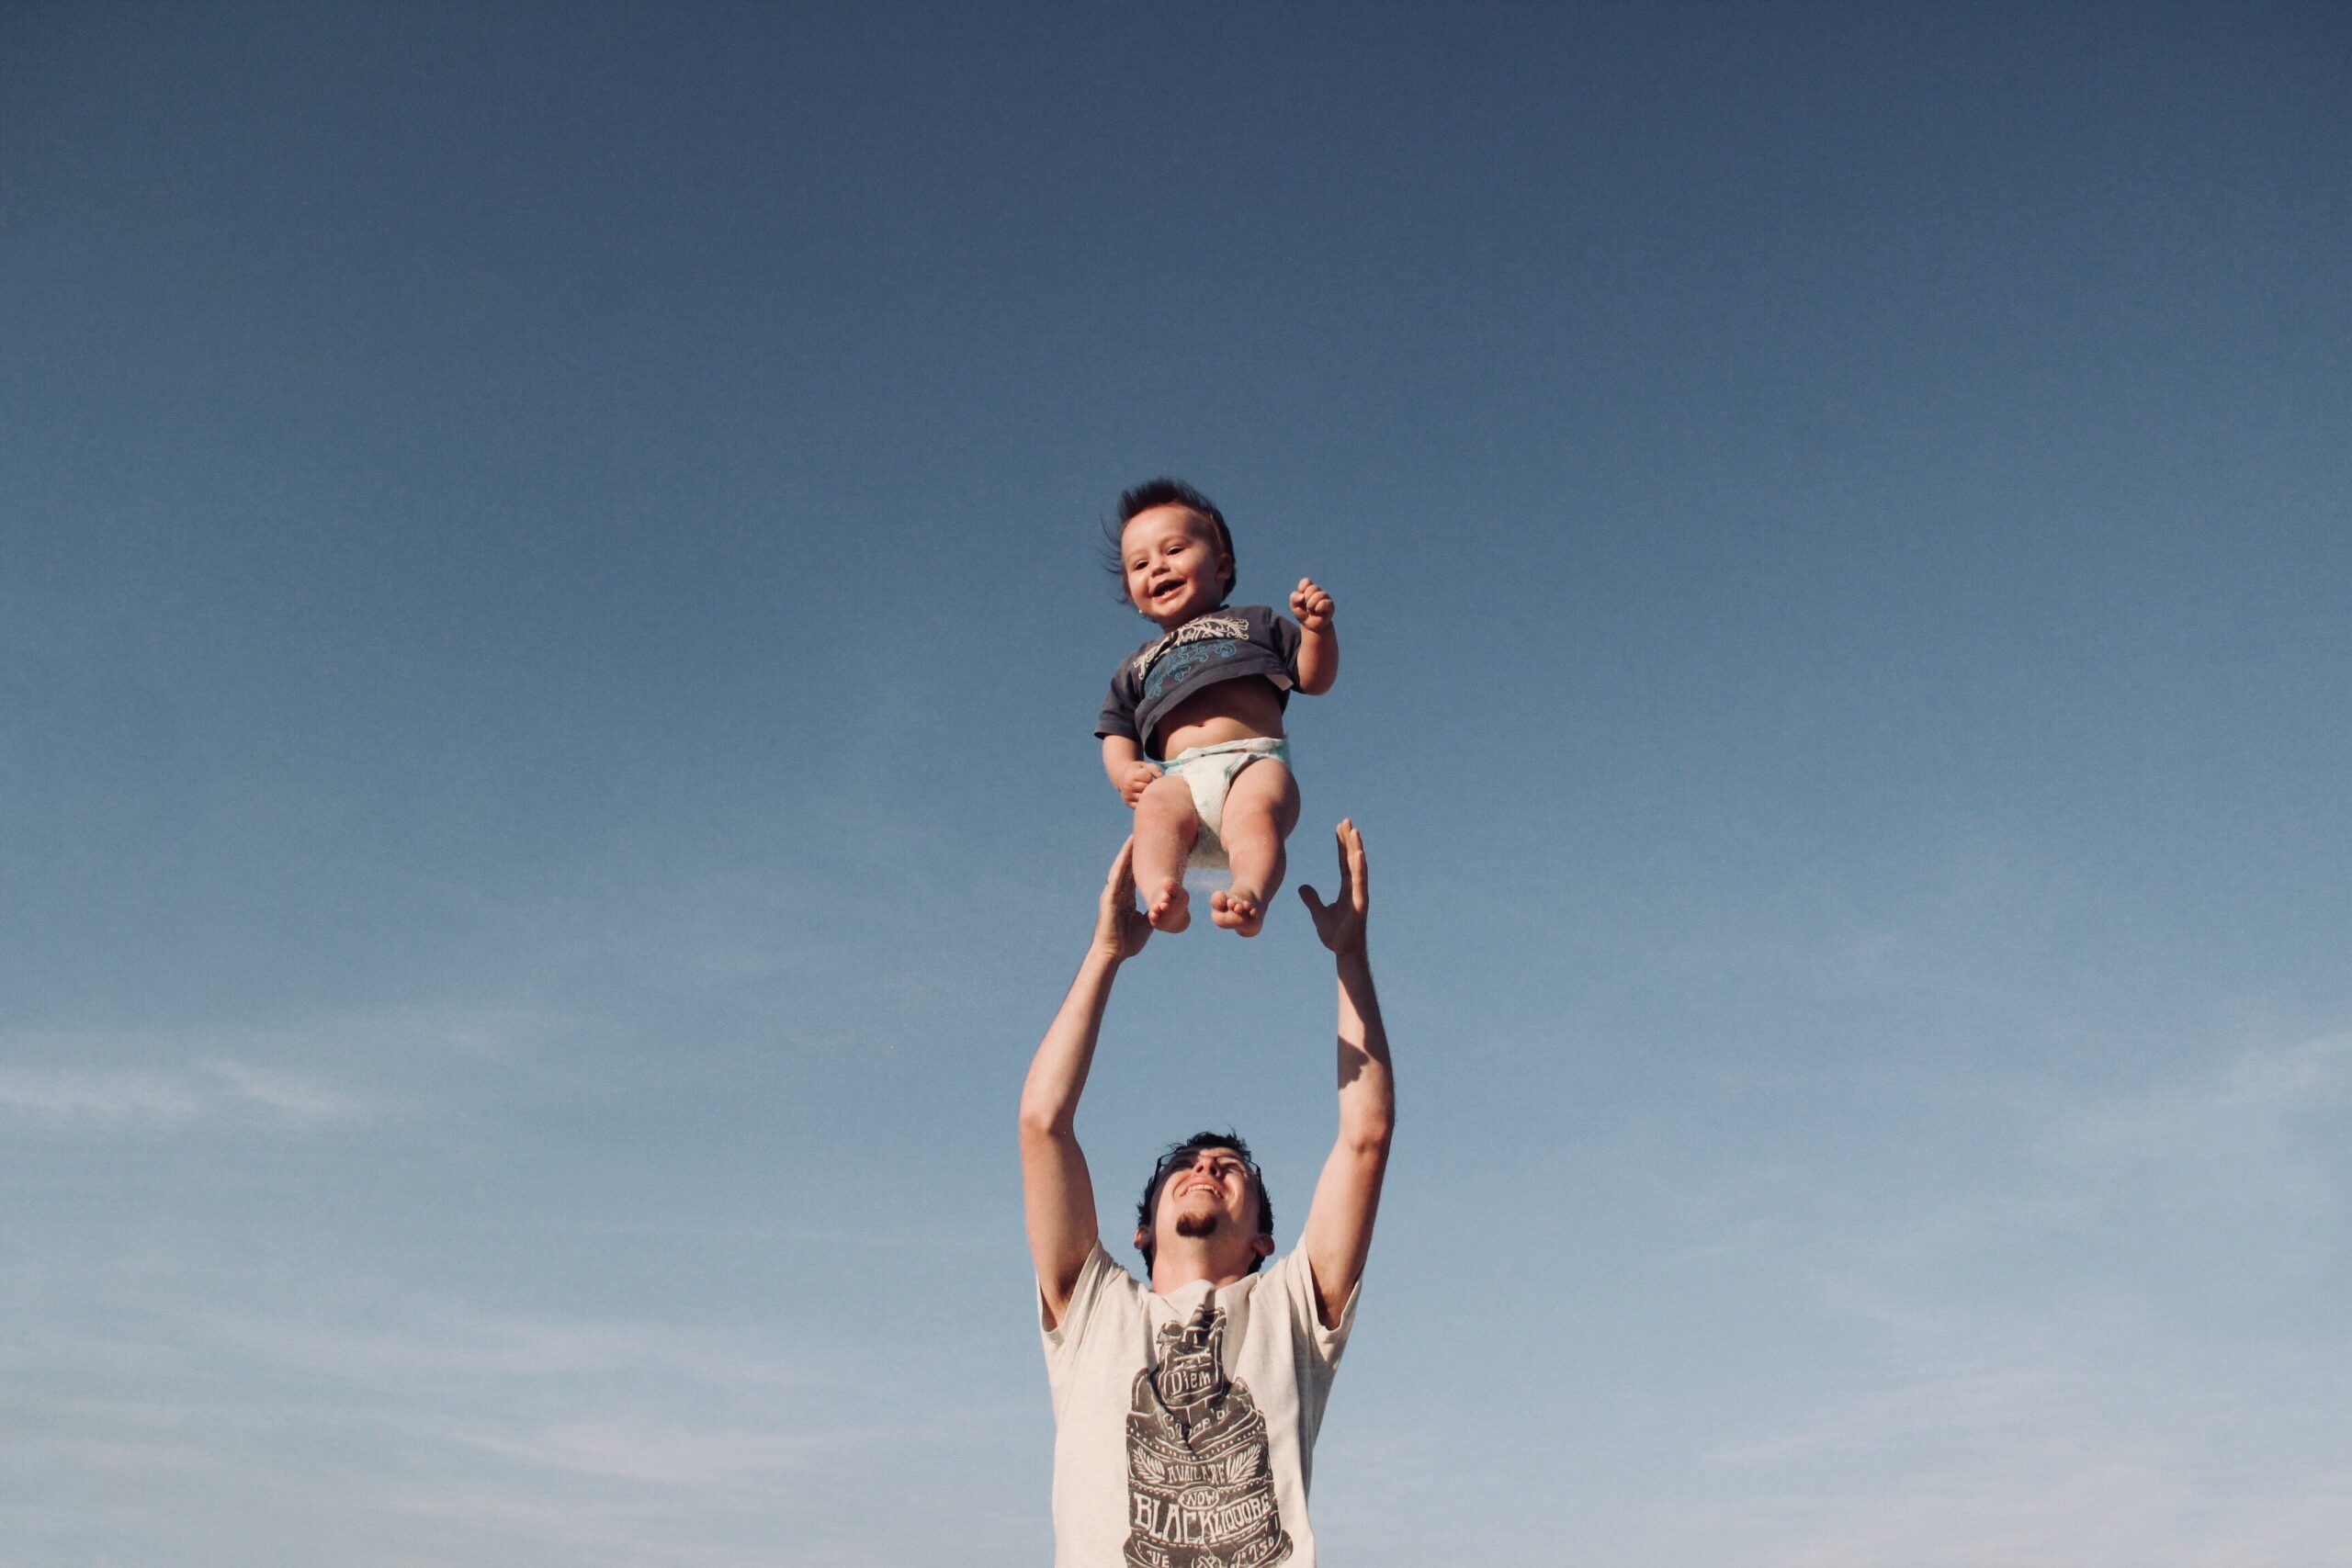 A father throwing his toddler into the air while the child is smiling.